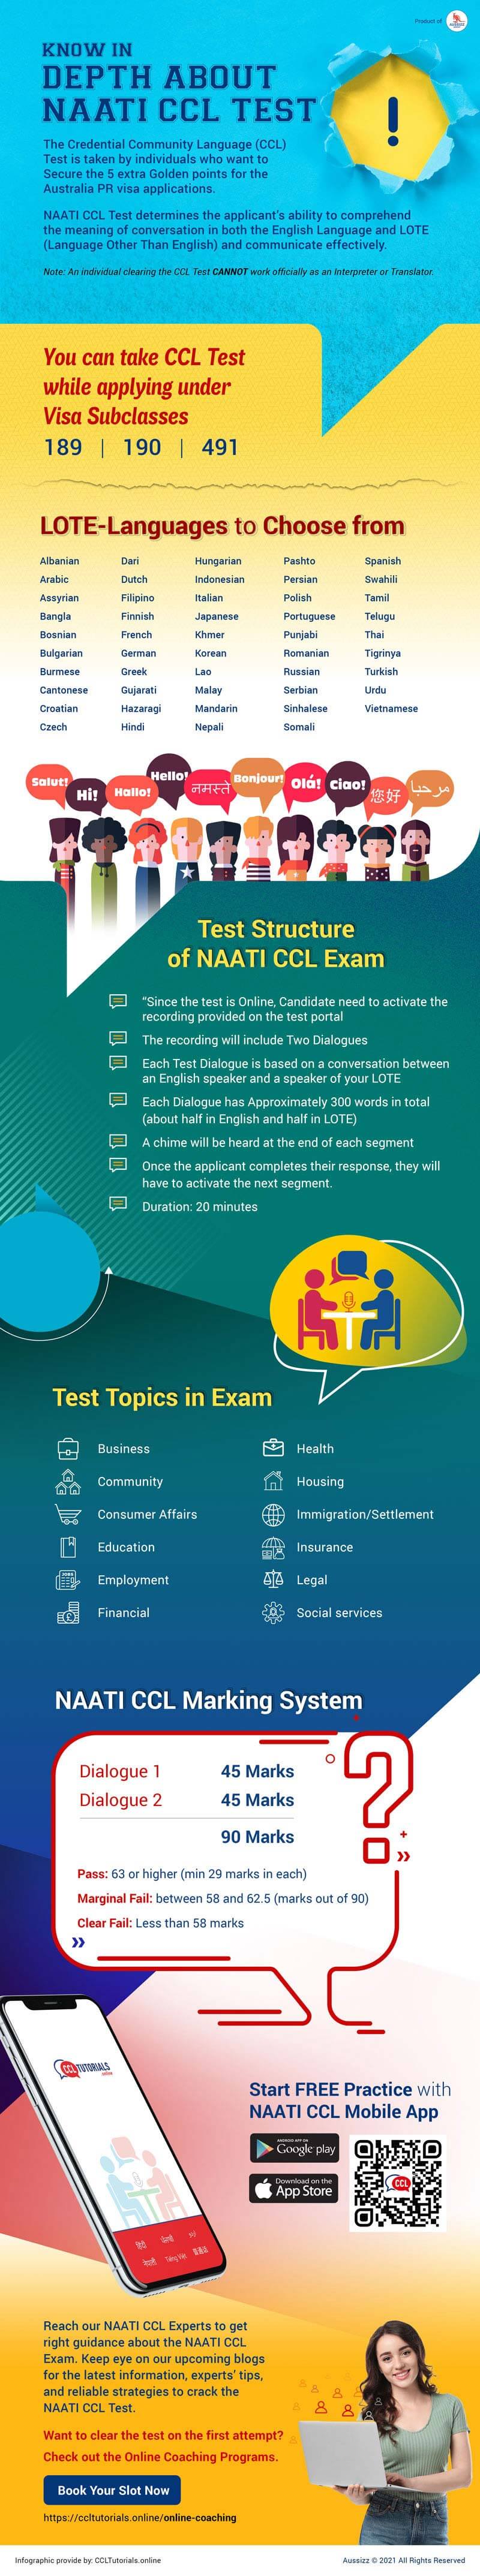 CCL Test Infographic